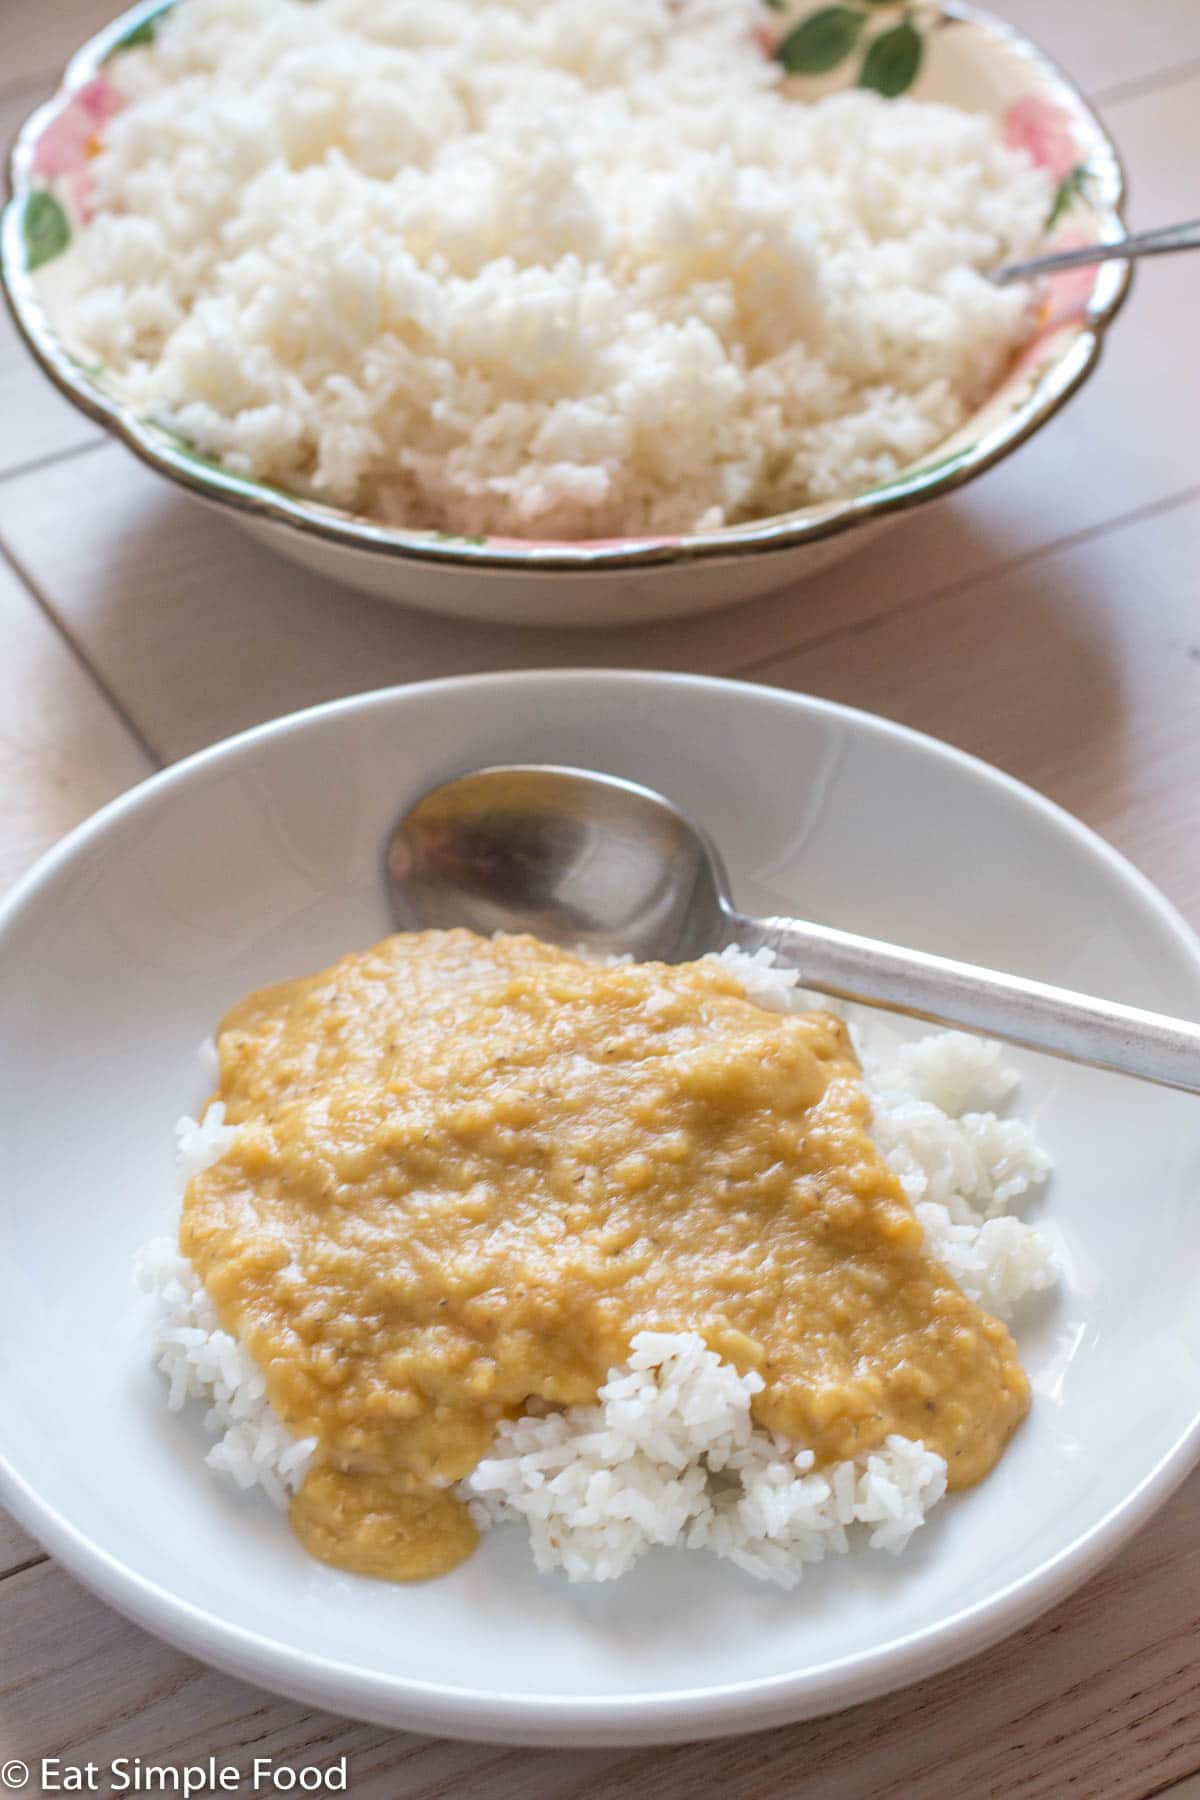 Side view. White bowl with spoon of white rice covered in yellow brown creamy lentil puree. White bowl of rice directly behind it. On white table.